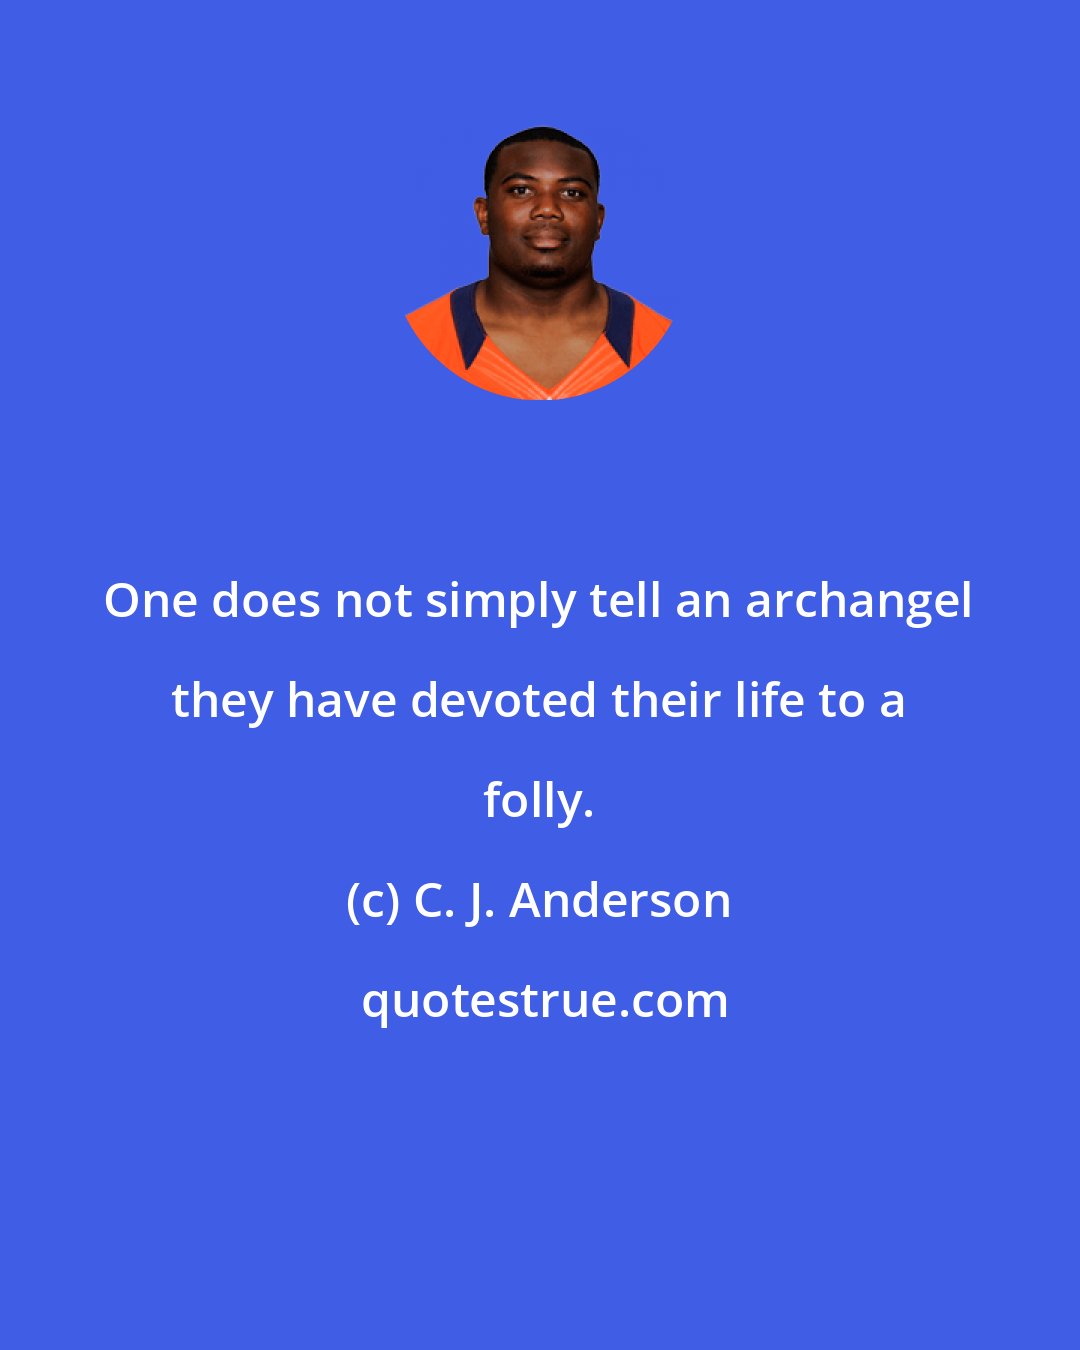 C. J. Anderson: One does not simply tell an archangel they have devoted their life to a folly.